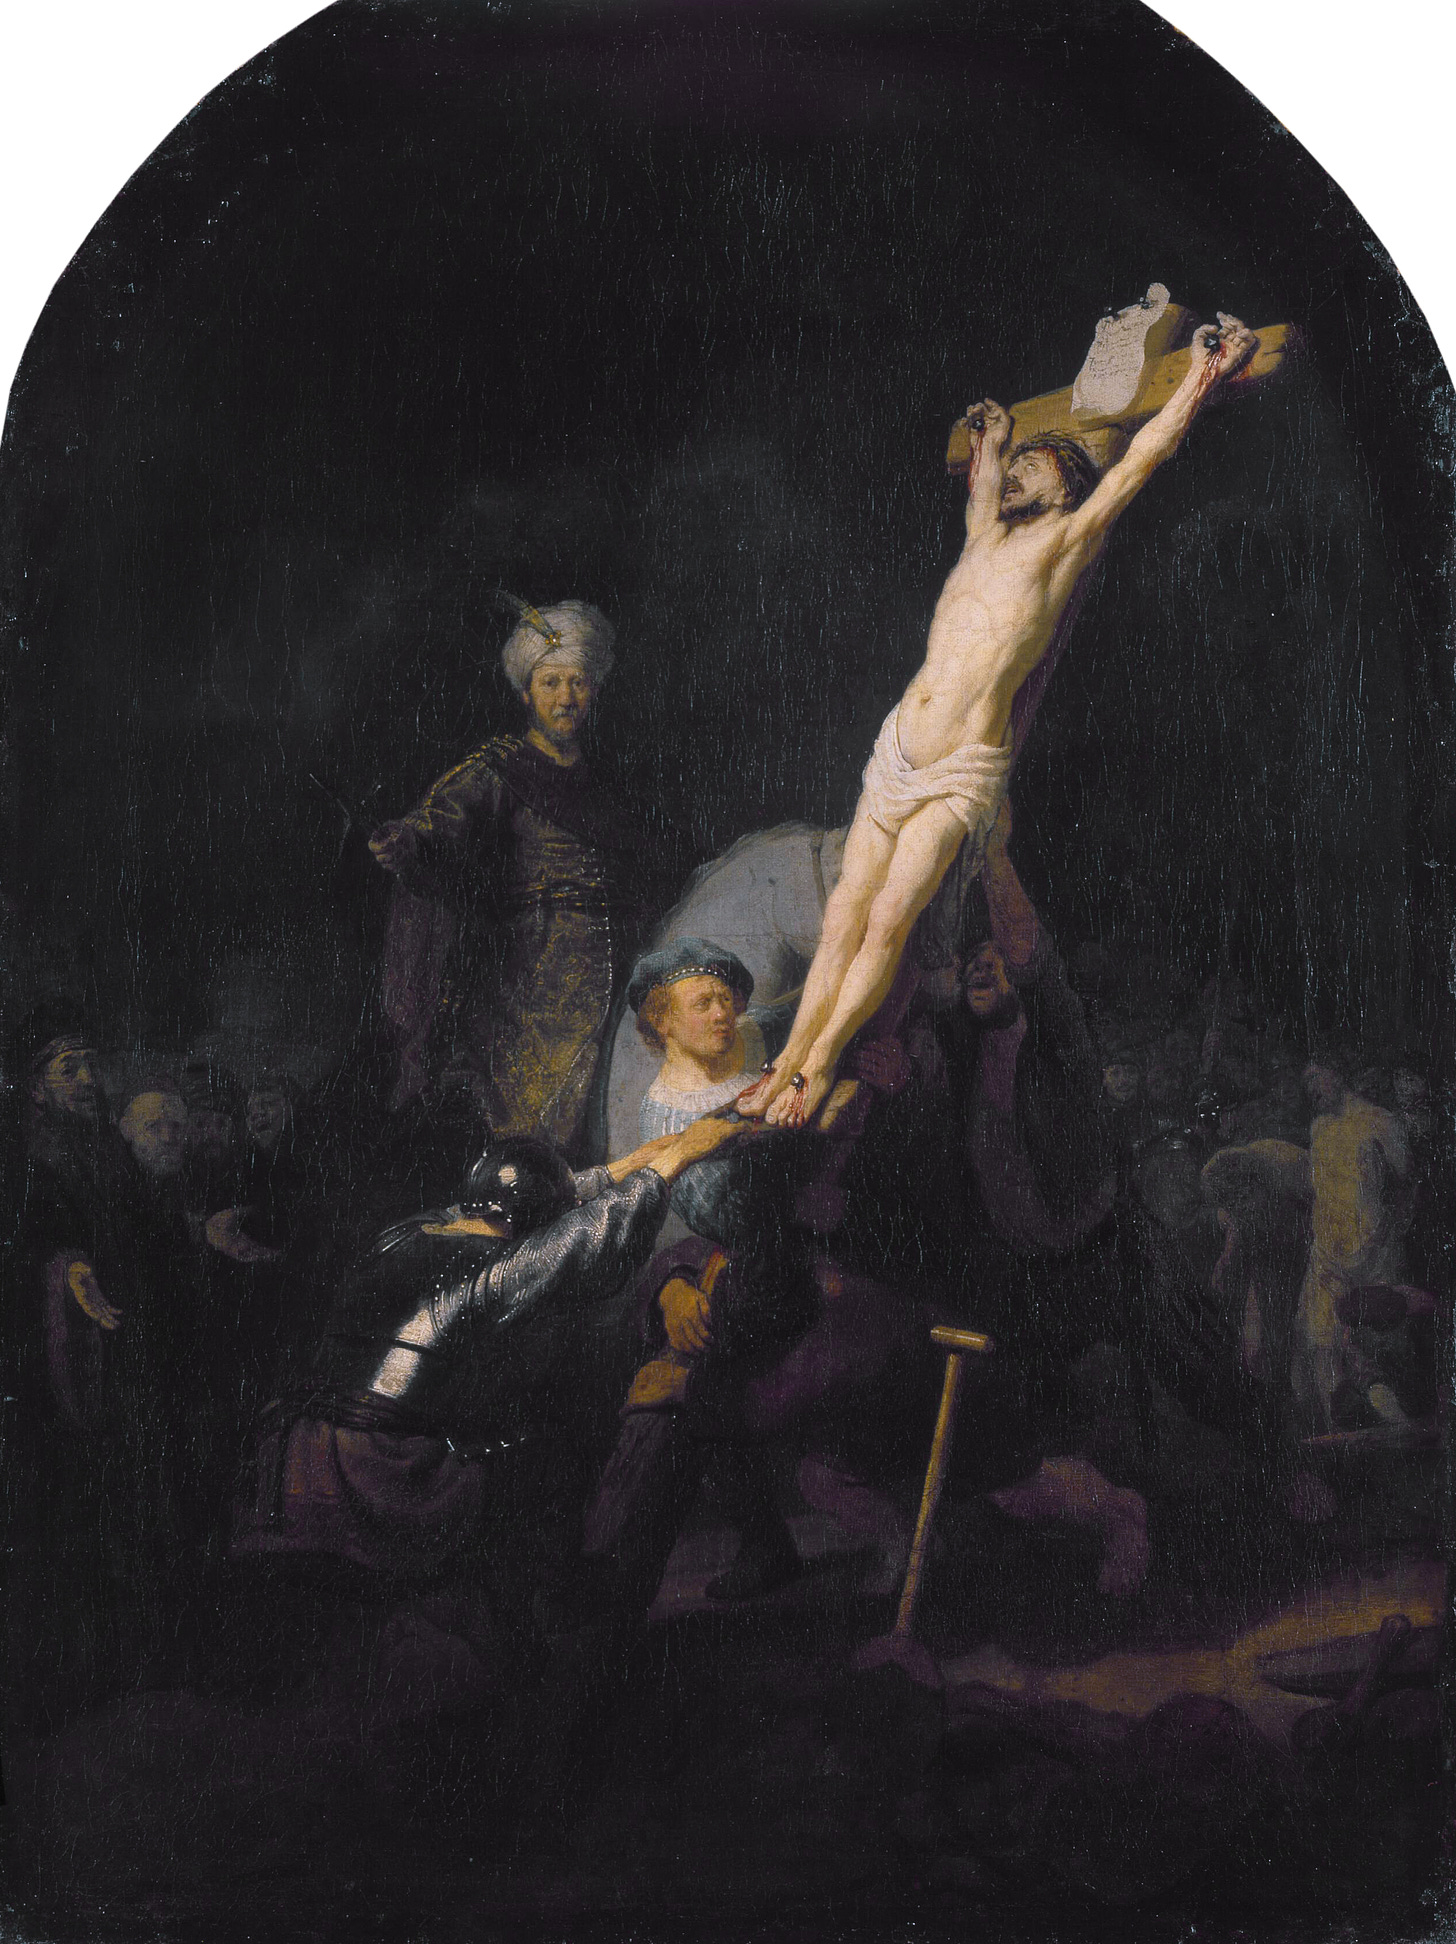 Raising of the Cross (Rembrandt) - Wikipedia